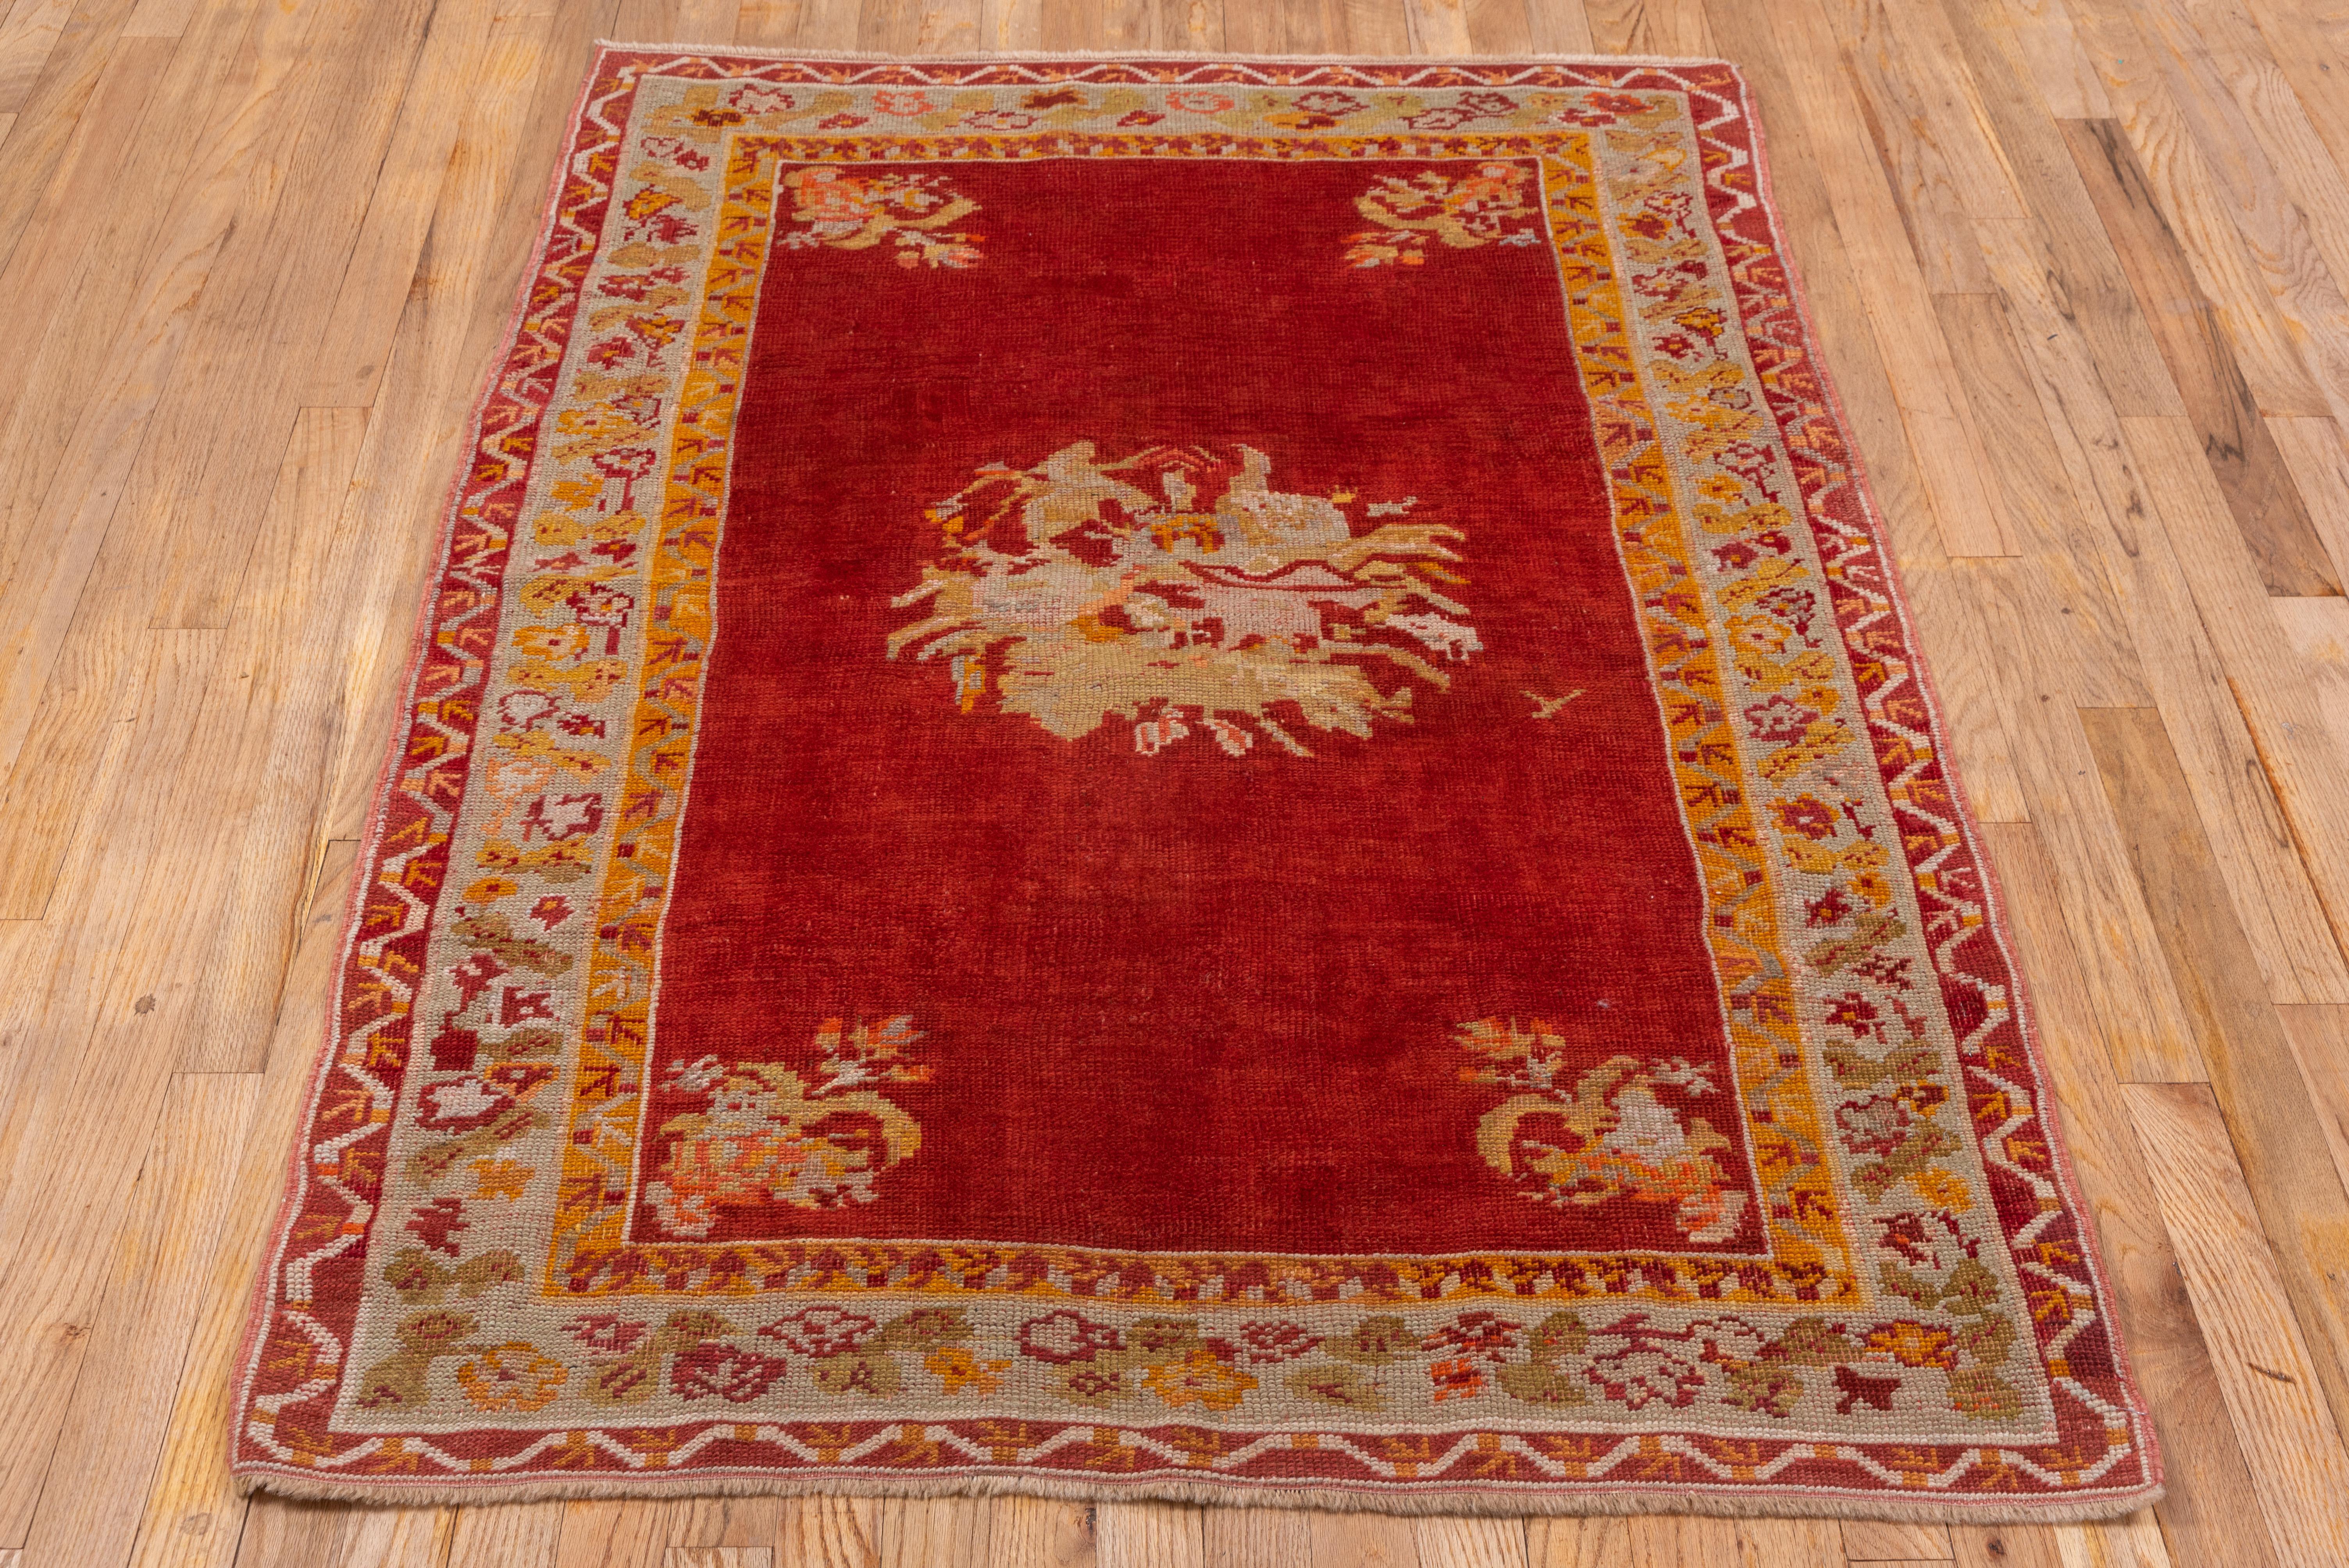 Hand-Knotted 1930s Antique Turkish Oushak Rug, Red Field, Floral Multicolored Borders For Sale